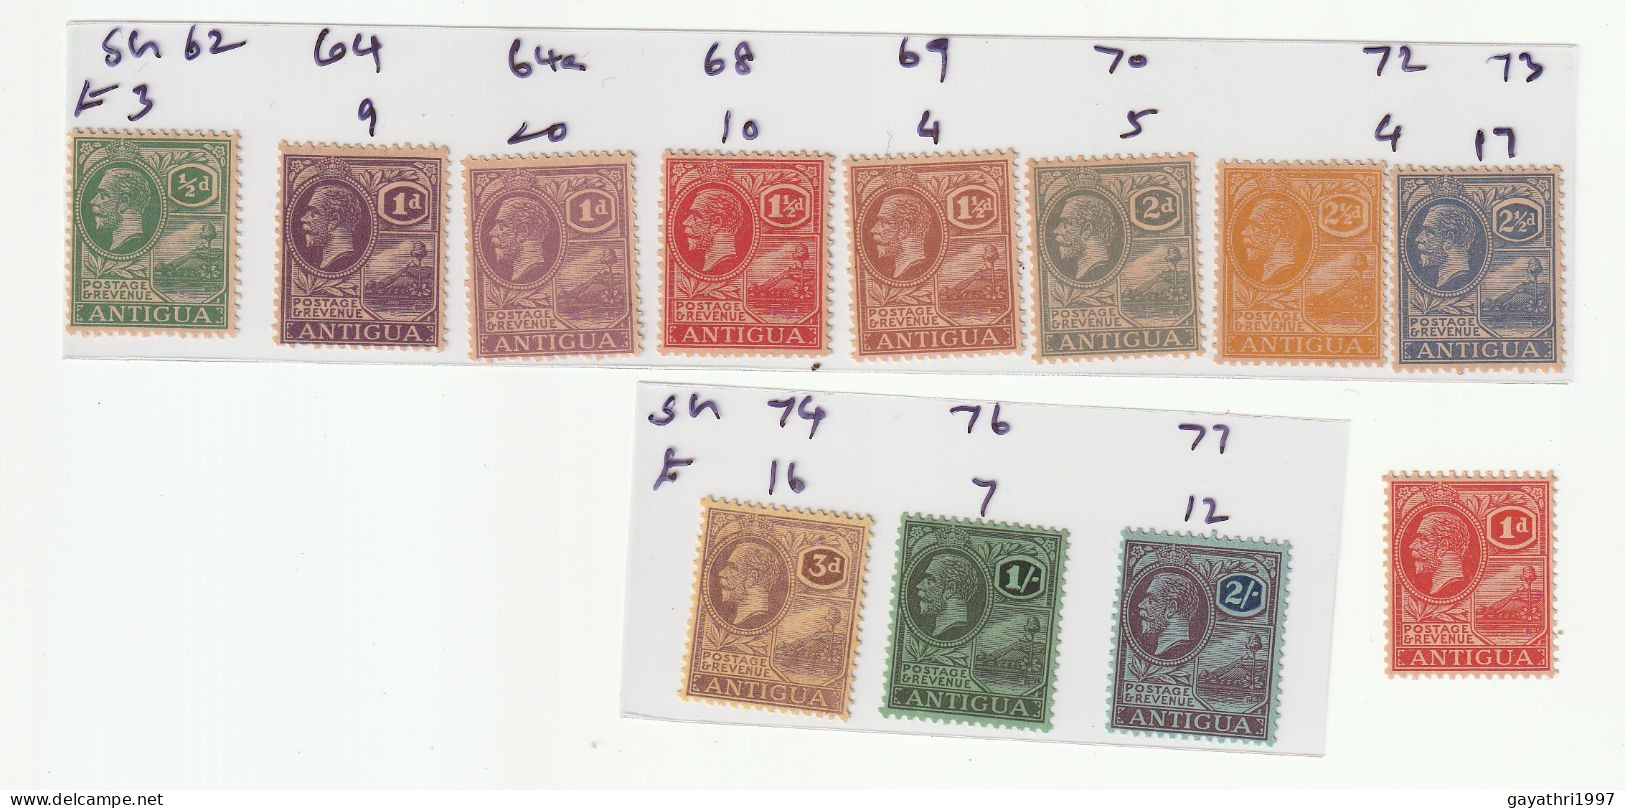 Antigua 1921 SG 62 -77 SET OF 12 STAMPS ( PART OF SET ) MINT MNH GOOD CONDITION (SH 90) - 1858-1960 Colonia Britannica